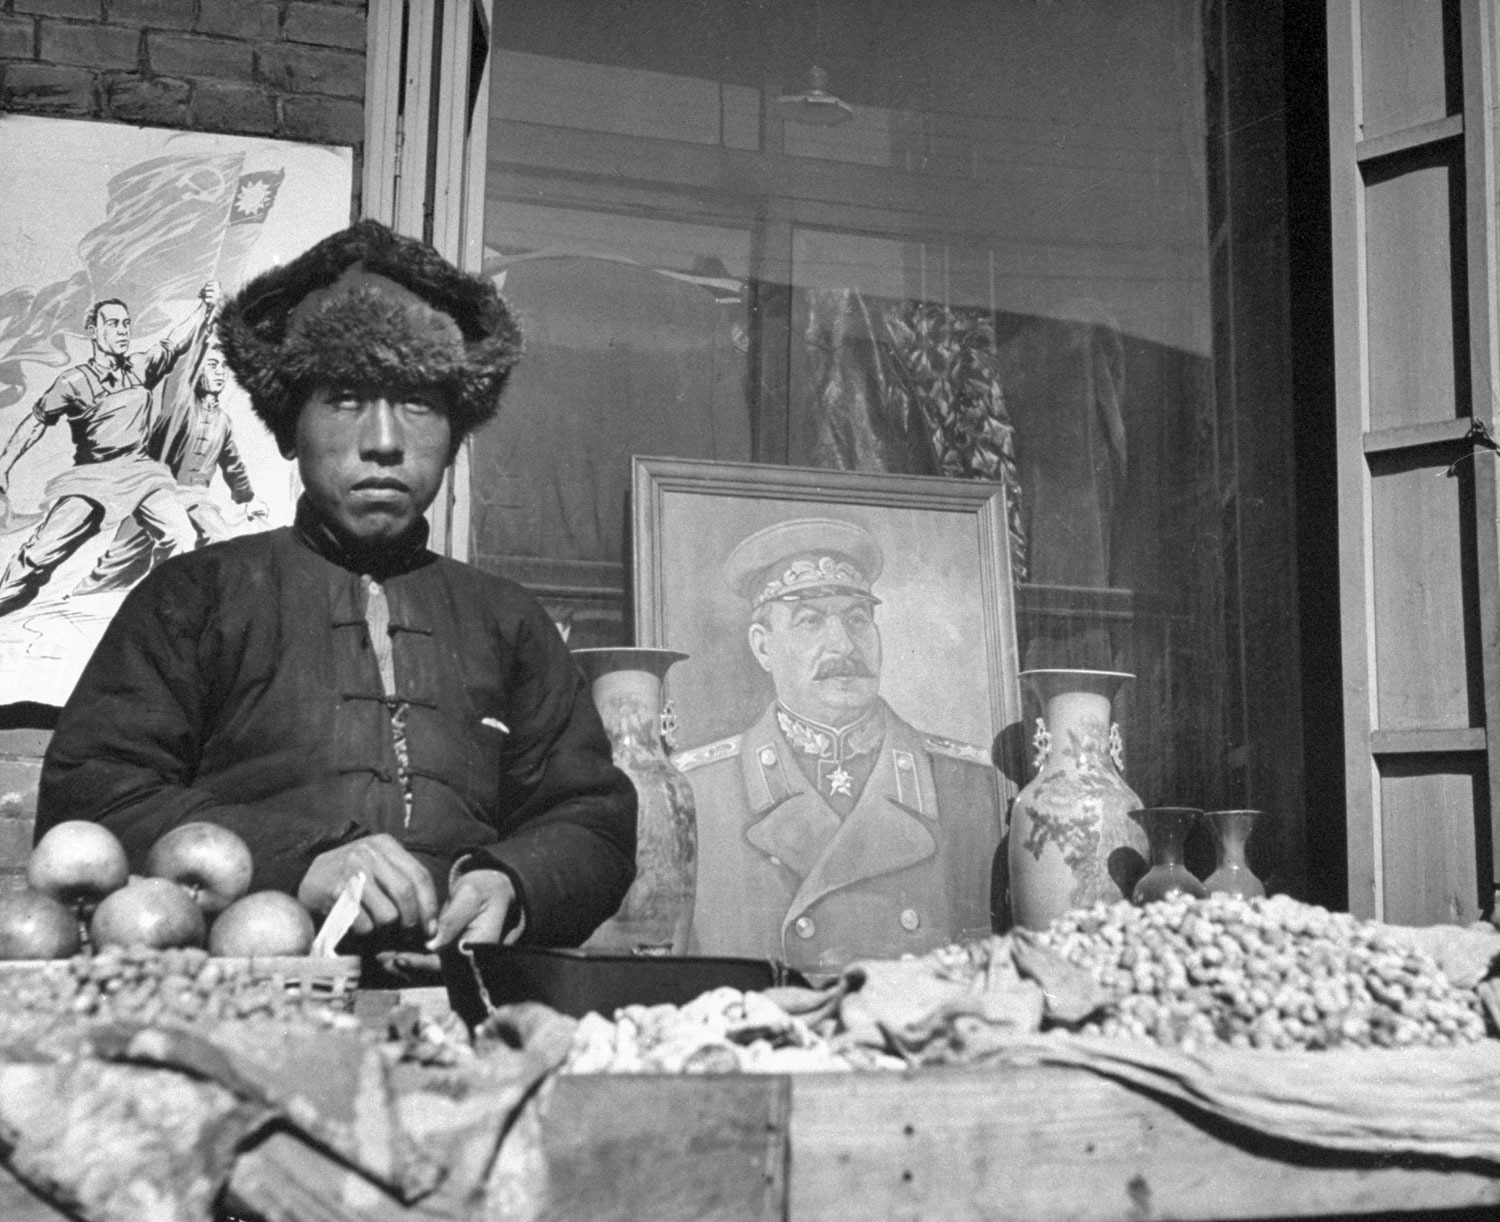 A poster of Stalin hangs in a shop window in Mukden, China, in 1946.